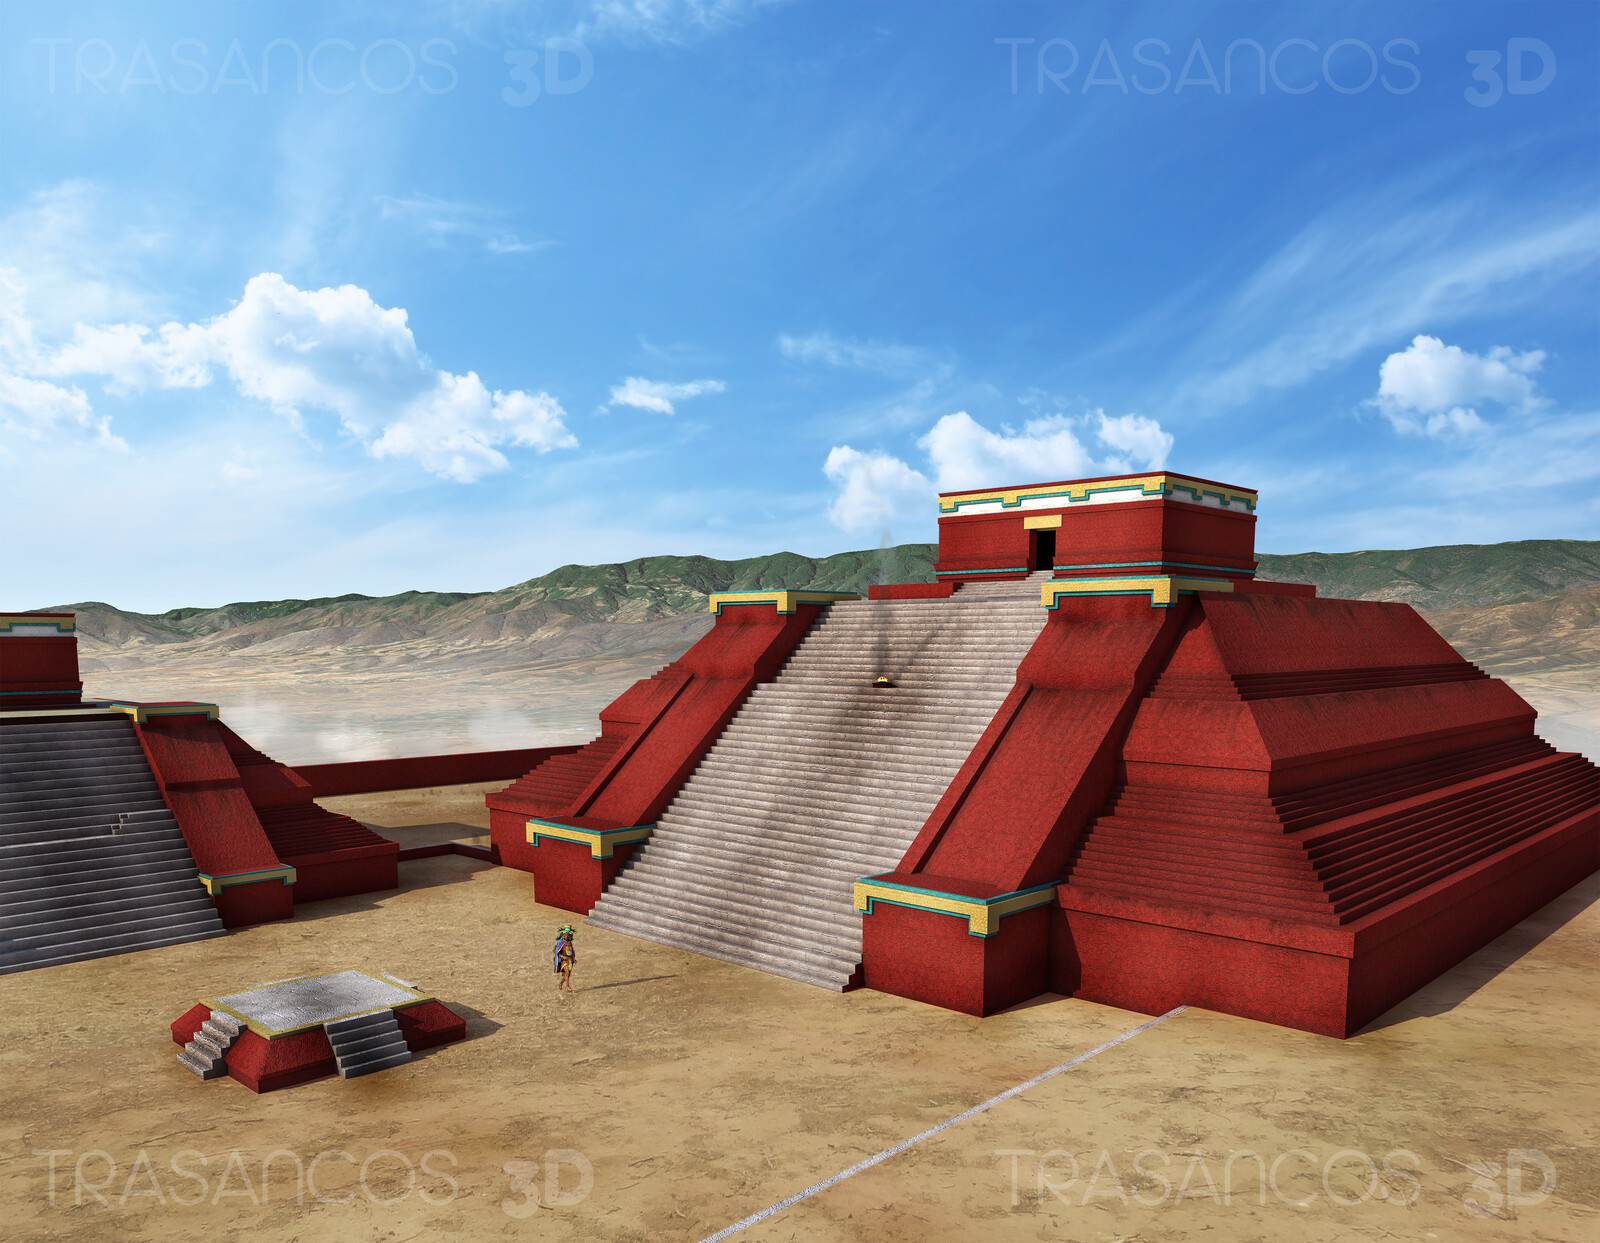 View of the temples in the South Platform of Monte Albán.
Modeled in collaboration with:
- Carlos Paz